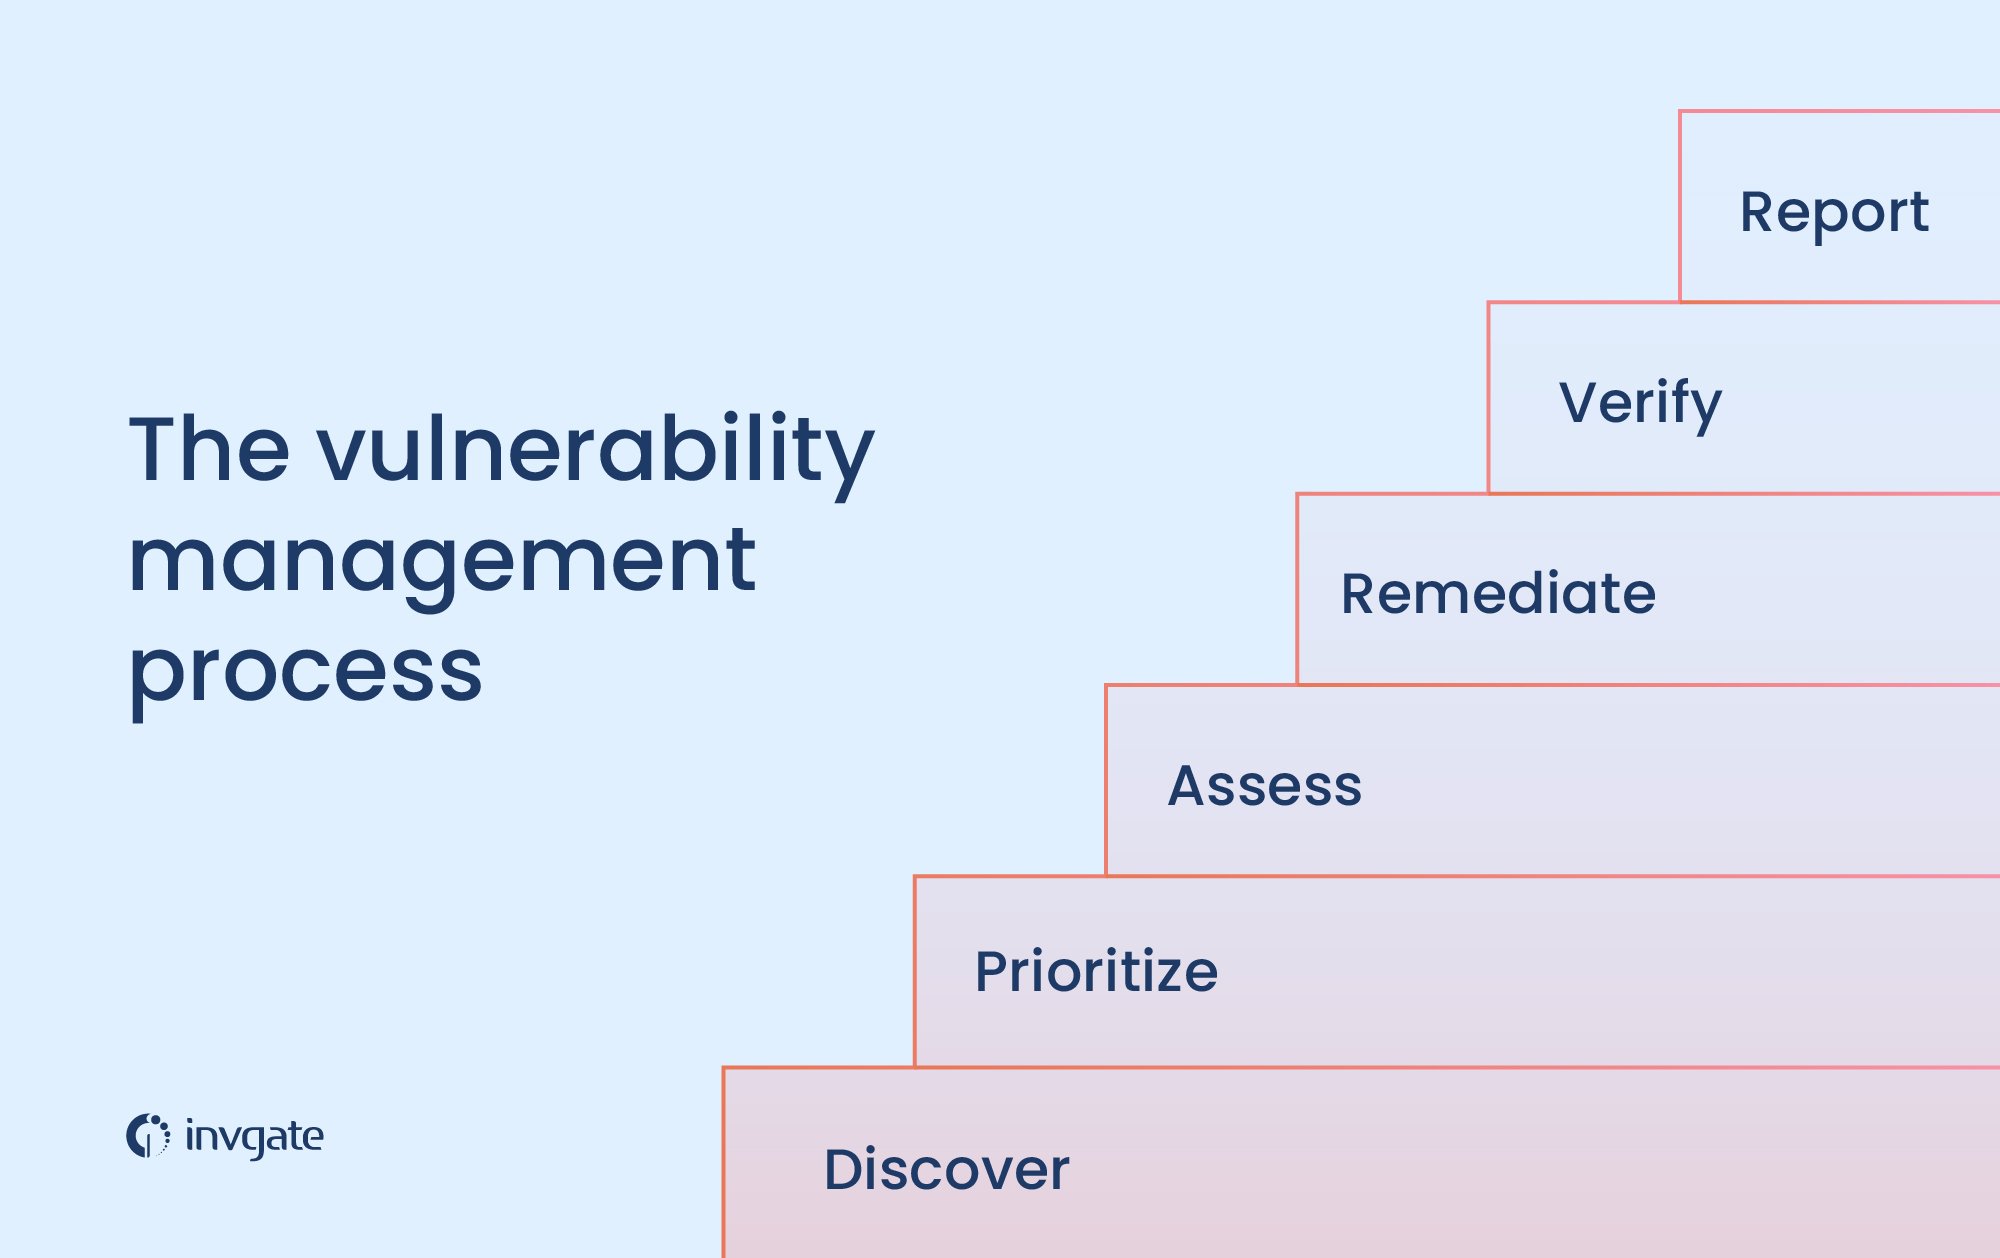 The vulnerability management process consists of 6 steps used to allow organizations to identify and deal with computer system security weaknesses effectively.